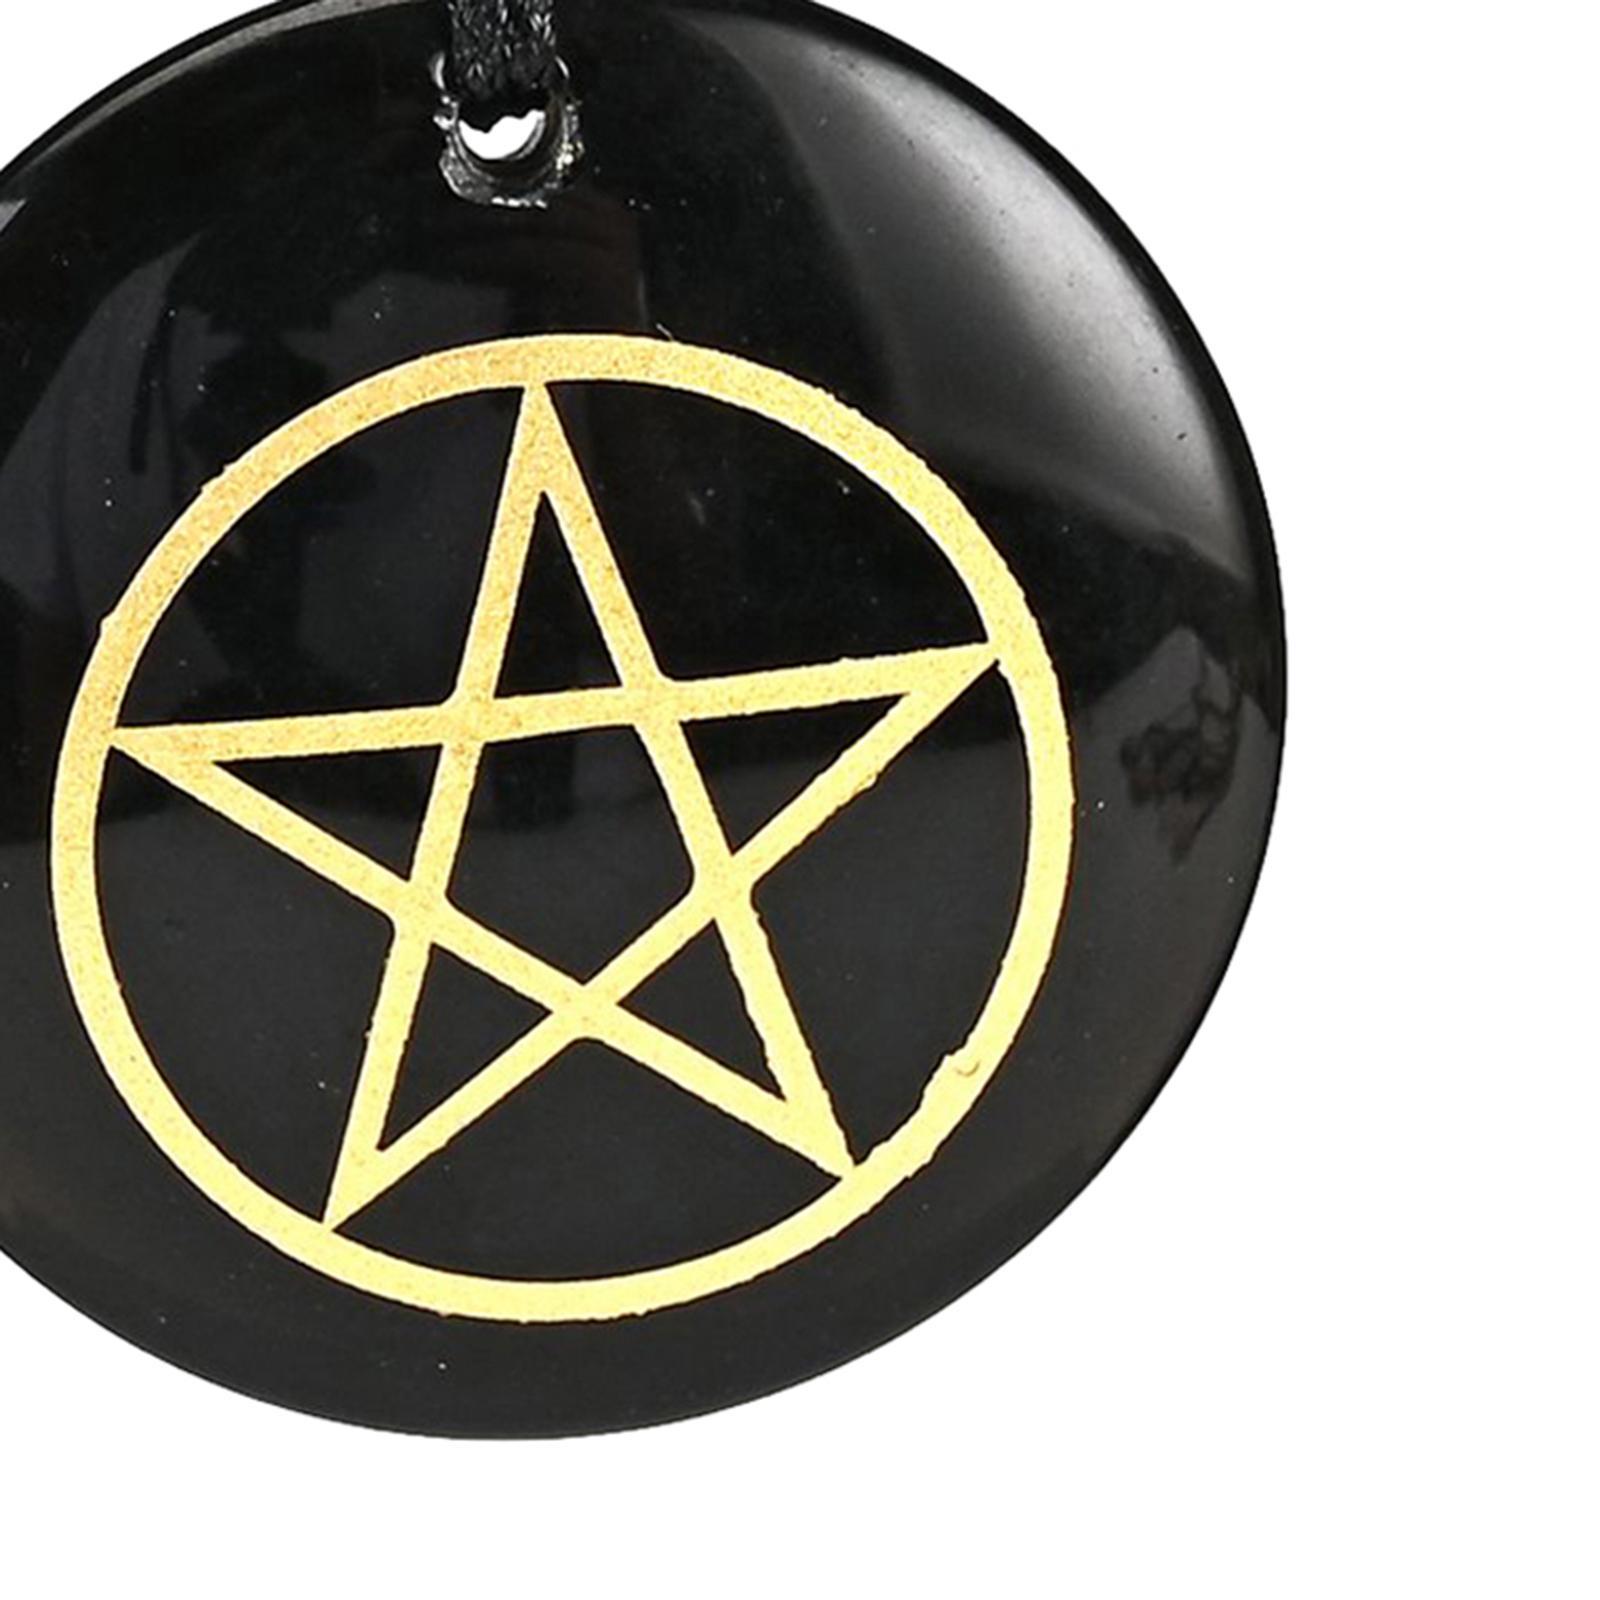 Stone Pendant Necklace Pentagram Charm Necklace for Anniversary Mother's Day